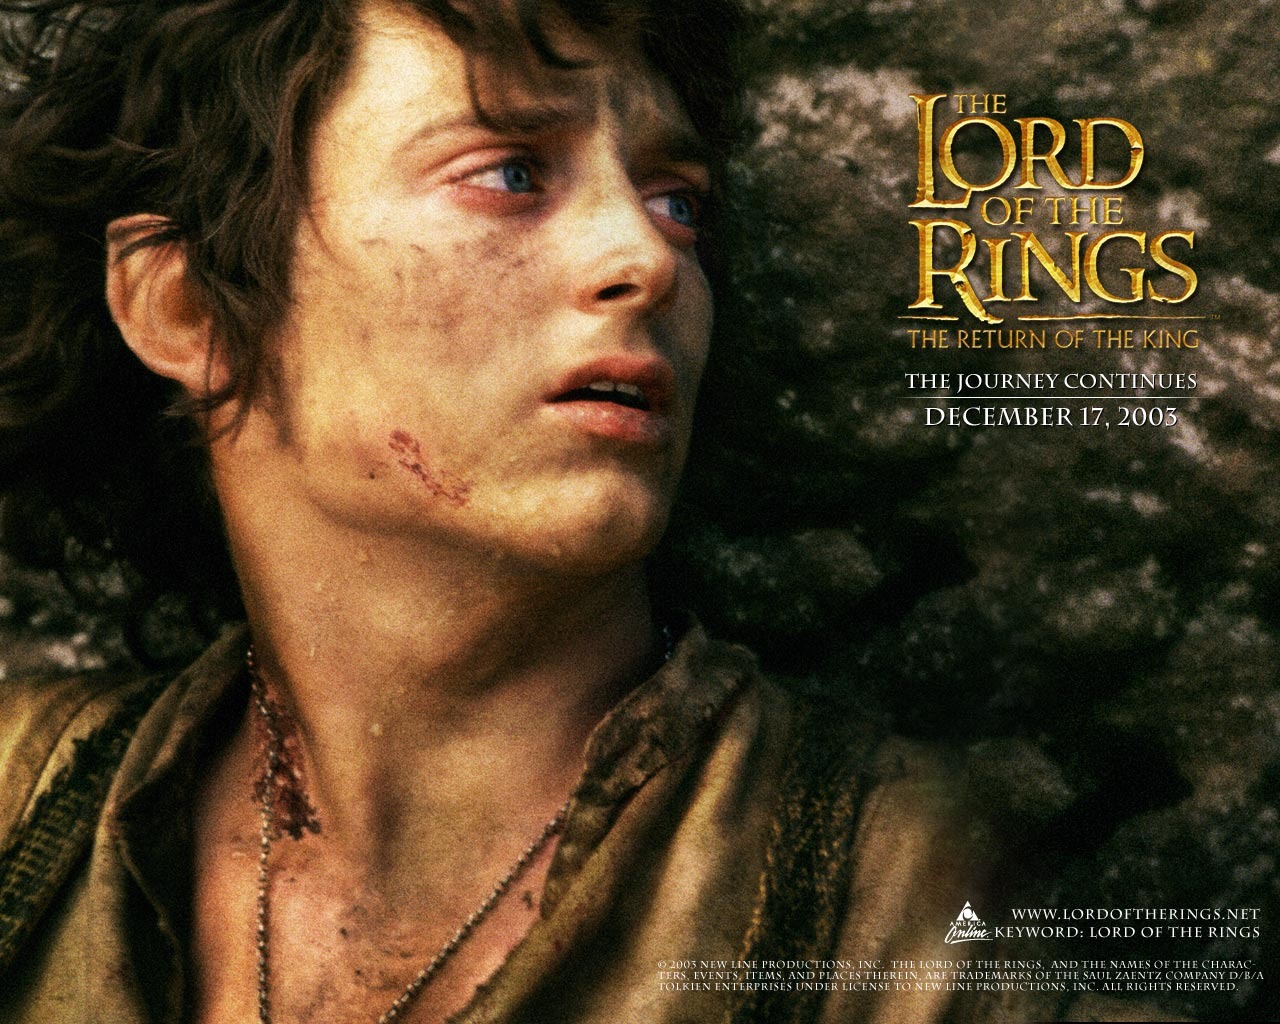 The Lord of the Rings wallpaper #18 - 1280x1024